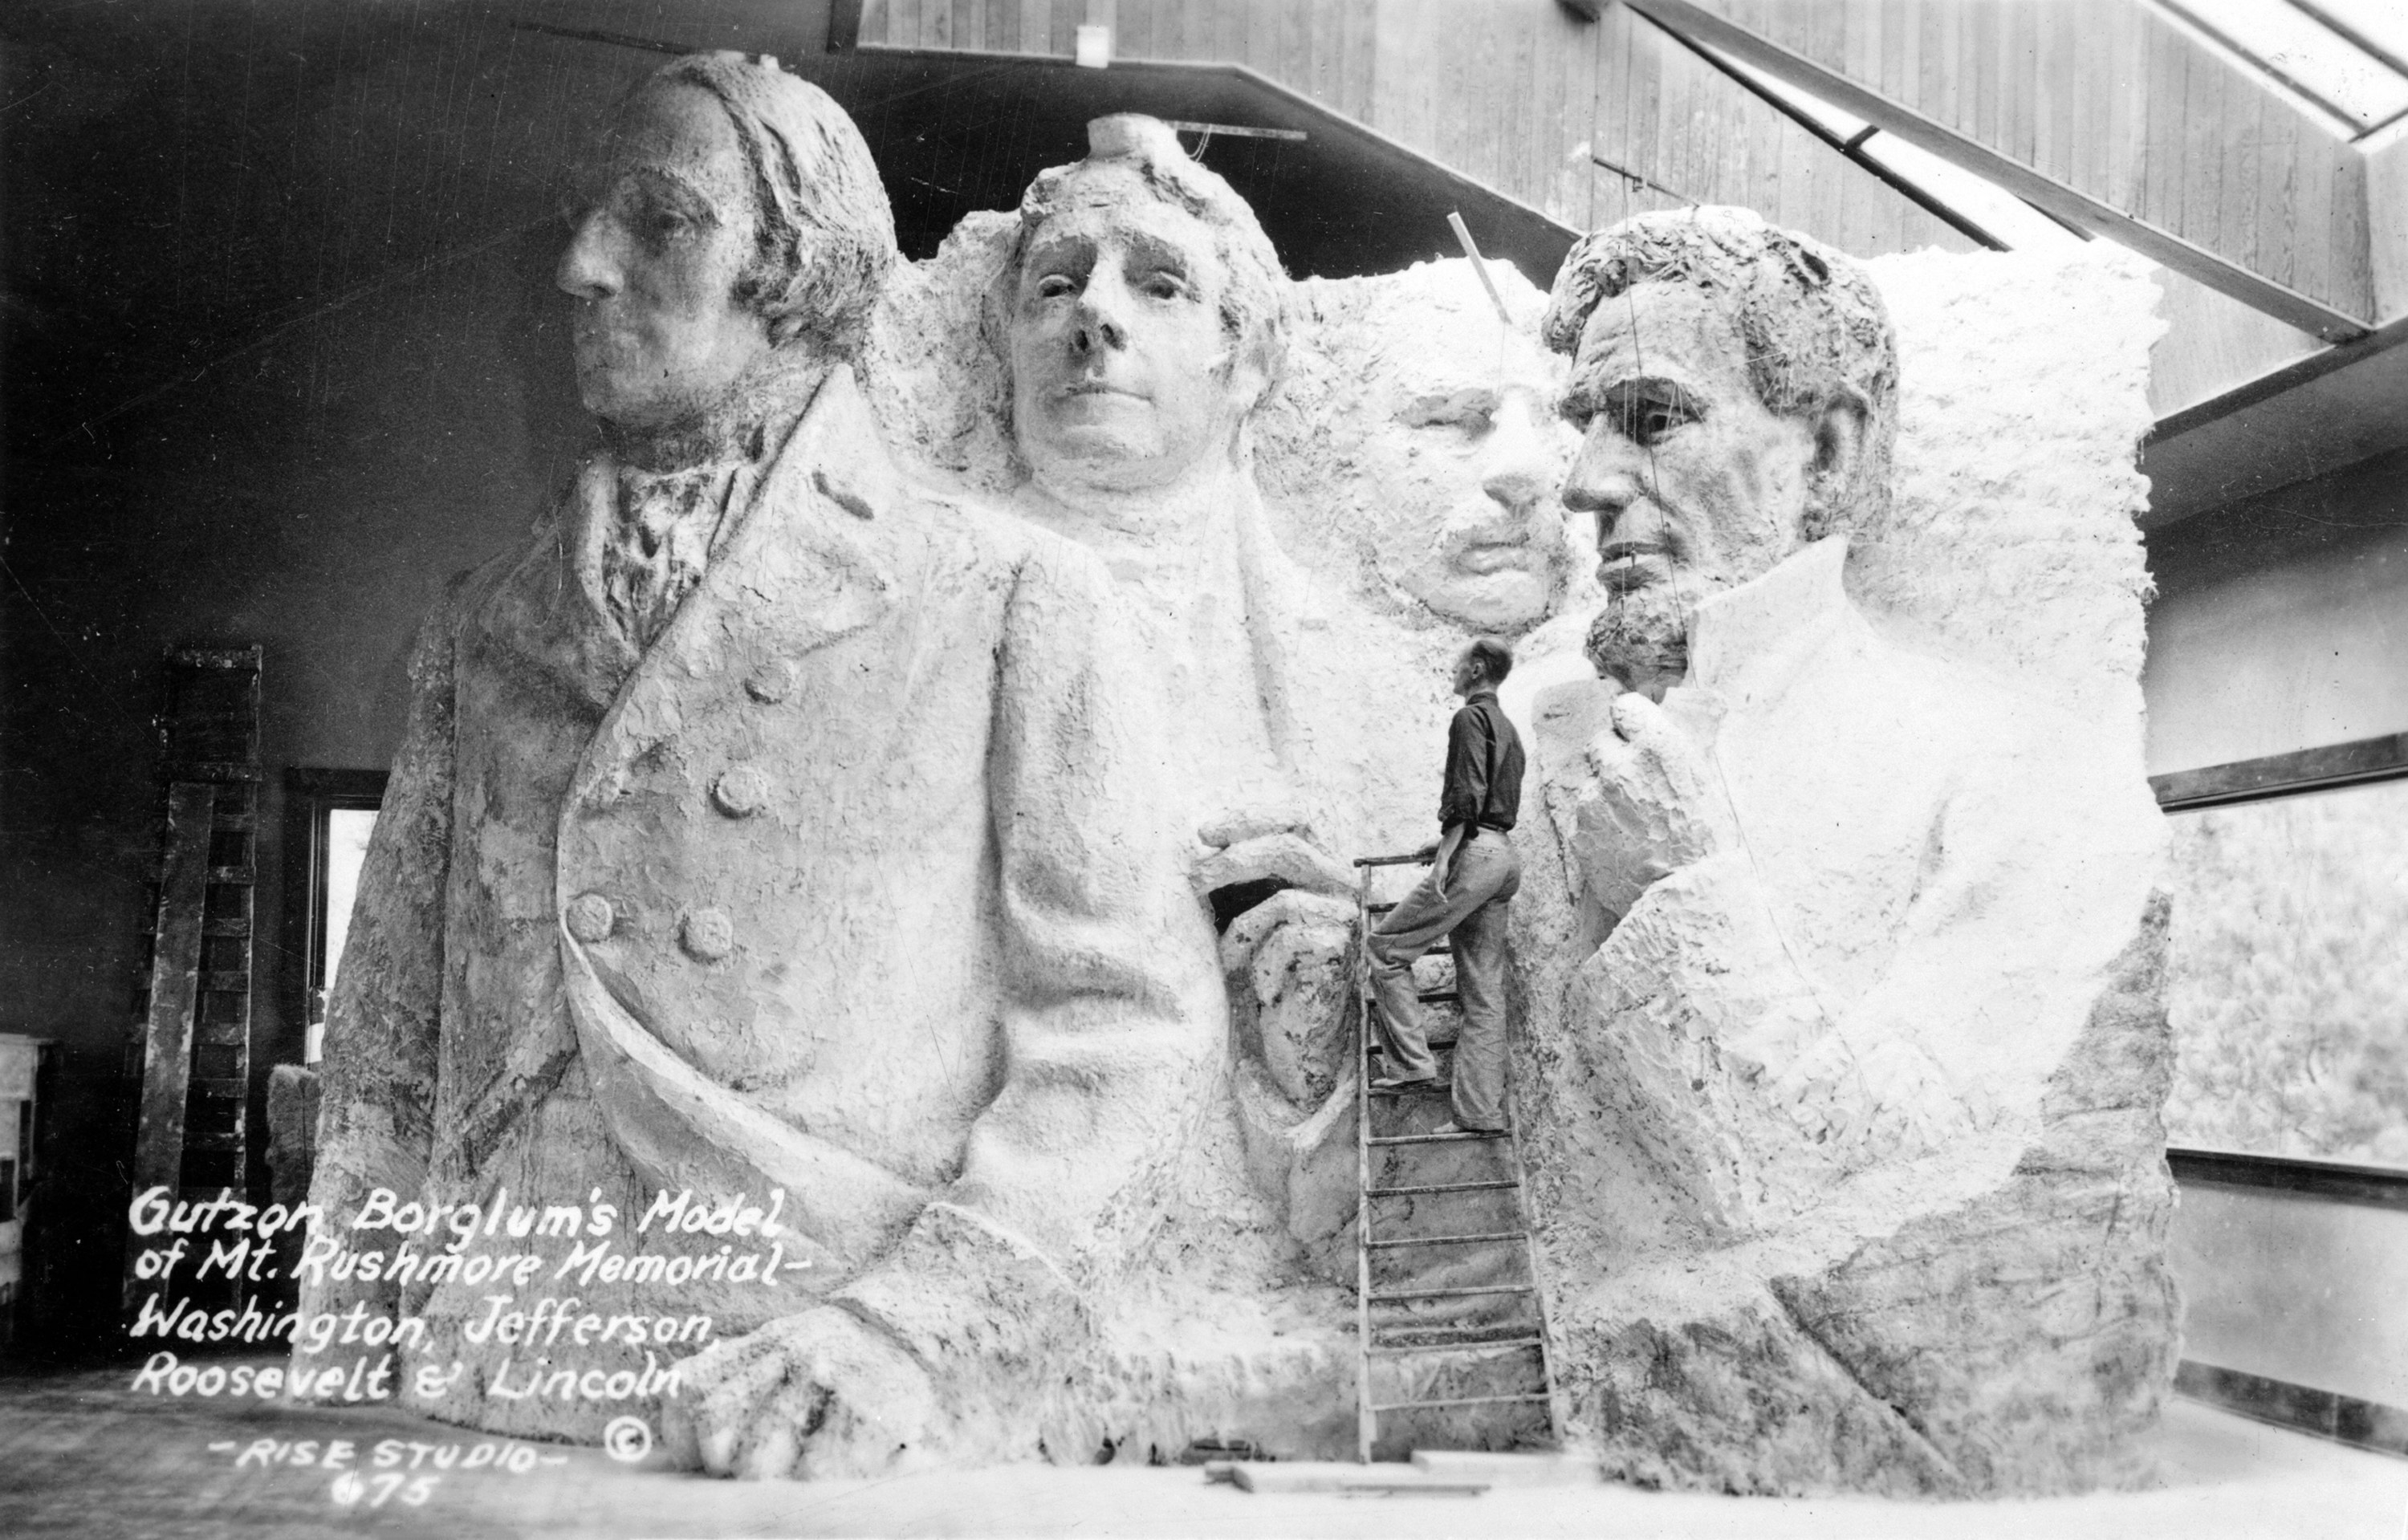 A model for Mount Rushmore